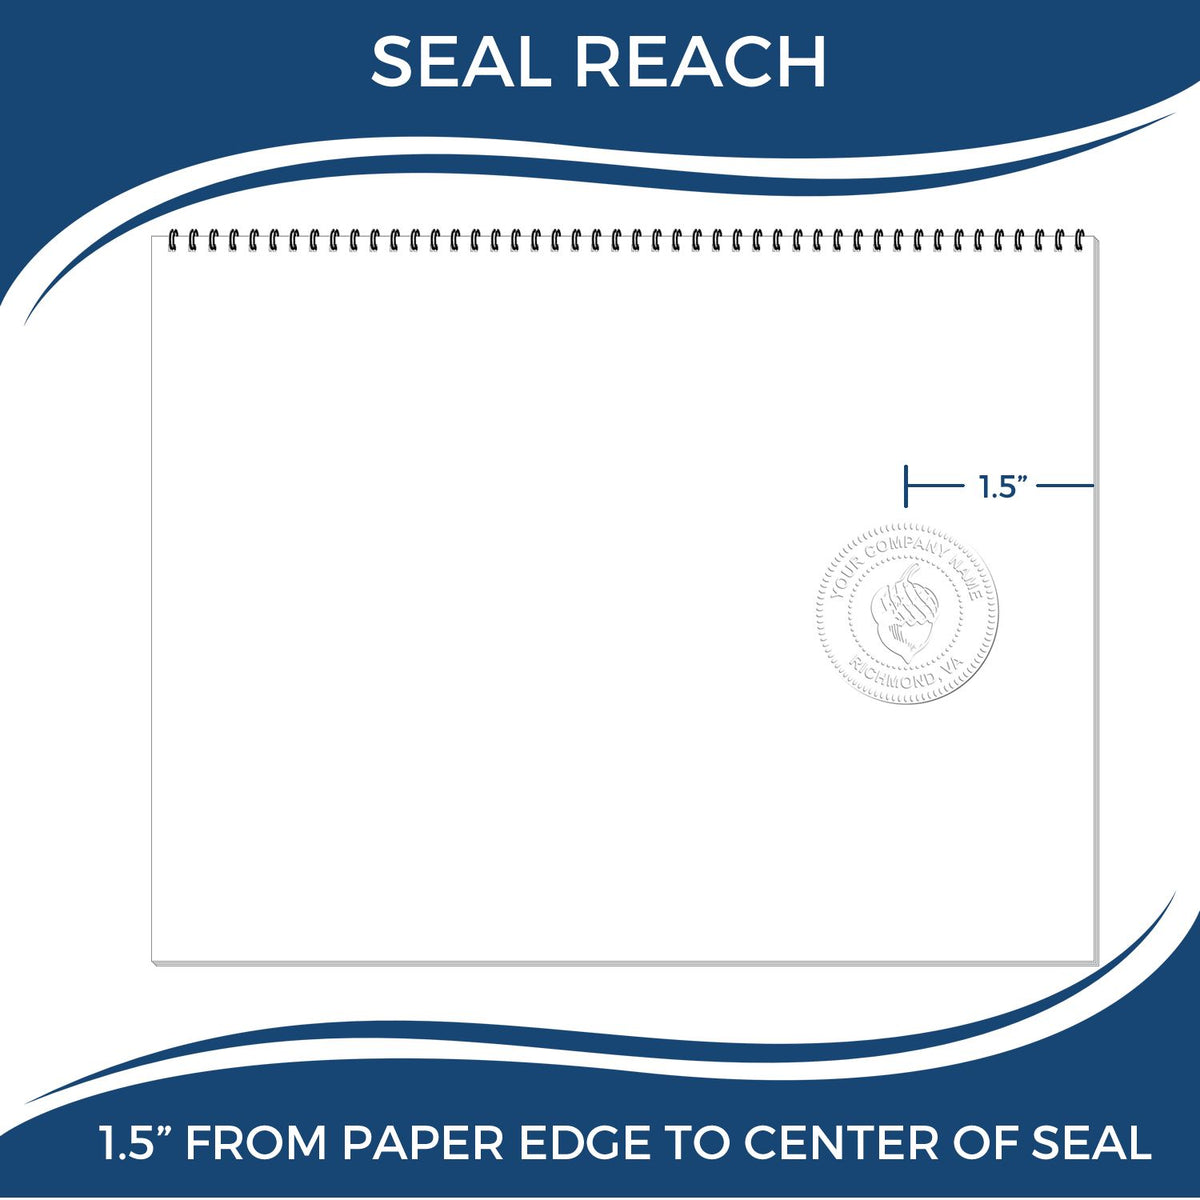 An infographic showing the seal reach which is represented by a ruler and a miniature seal image of the Gift New York Land Surveyor Seal